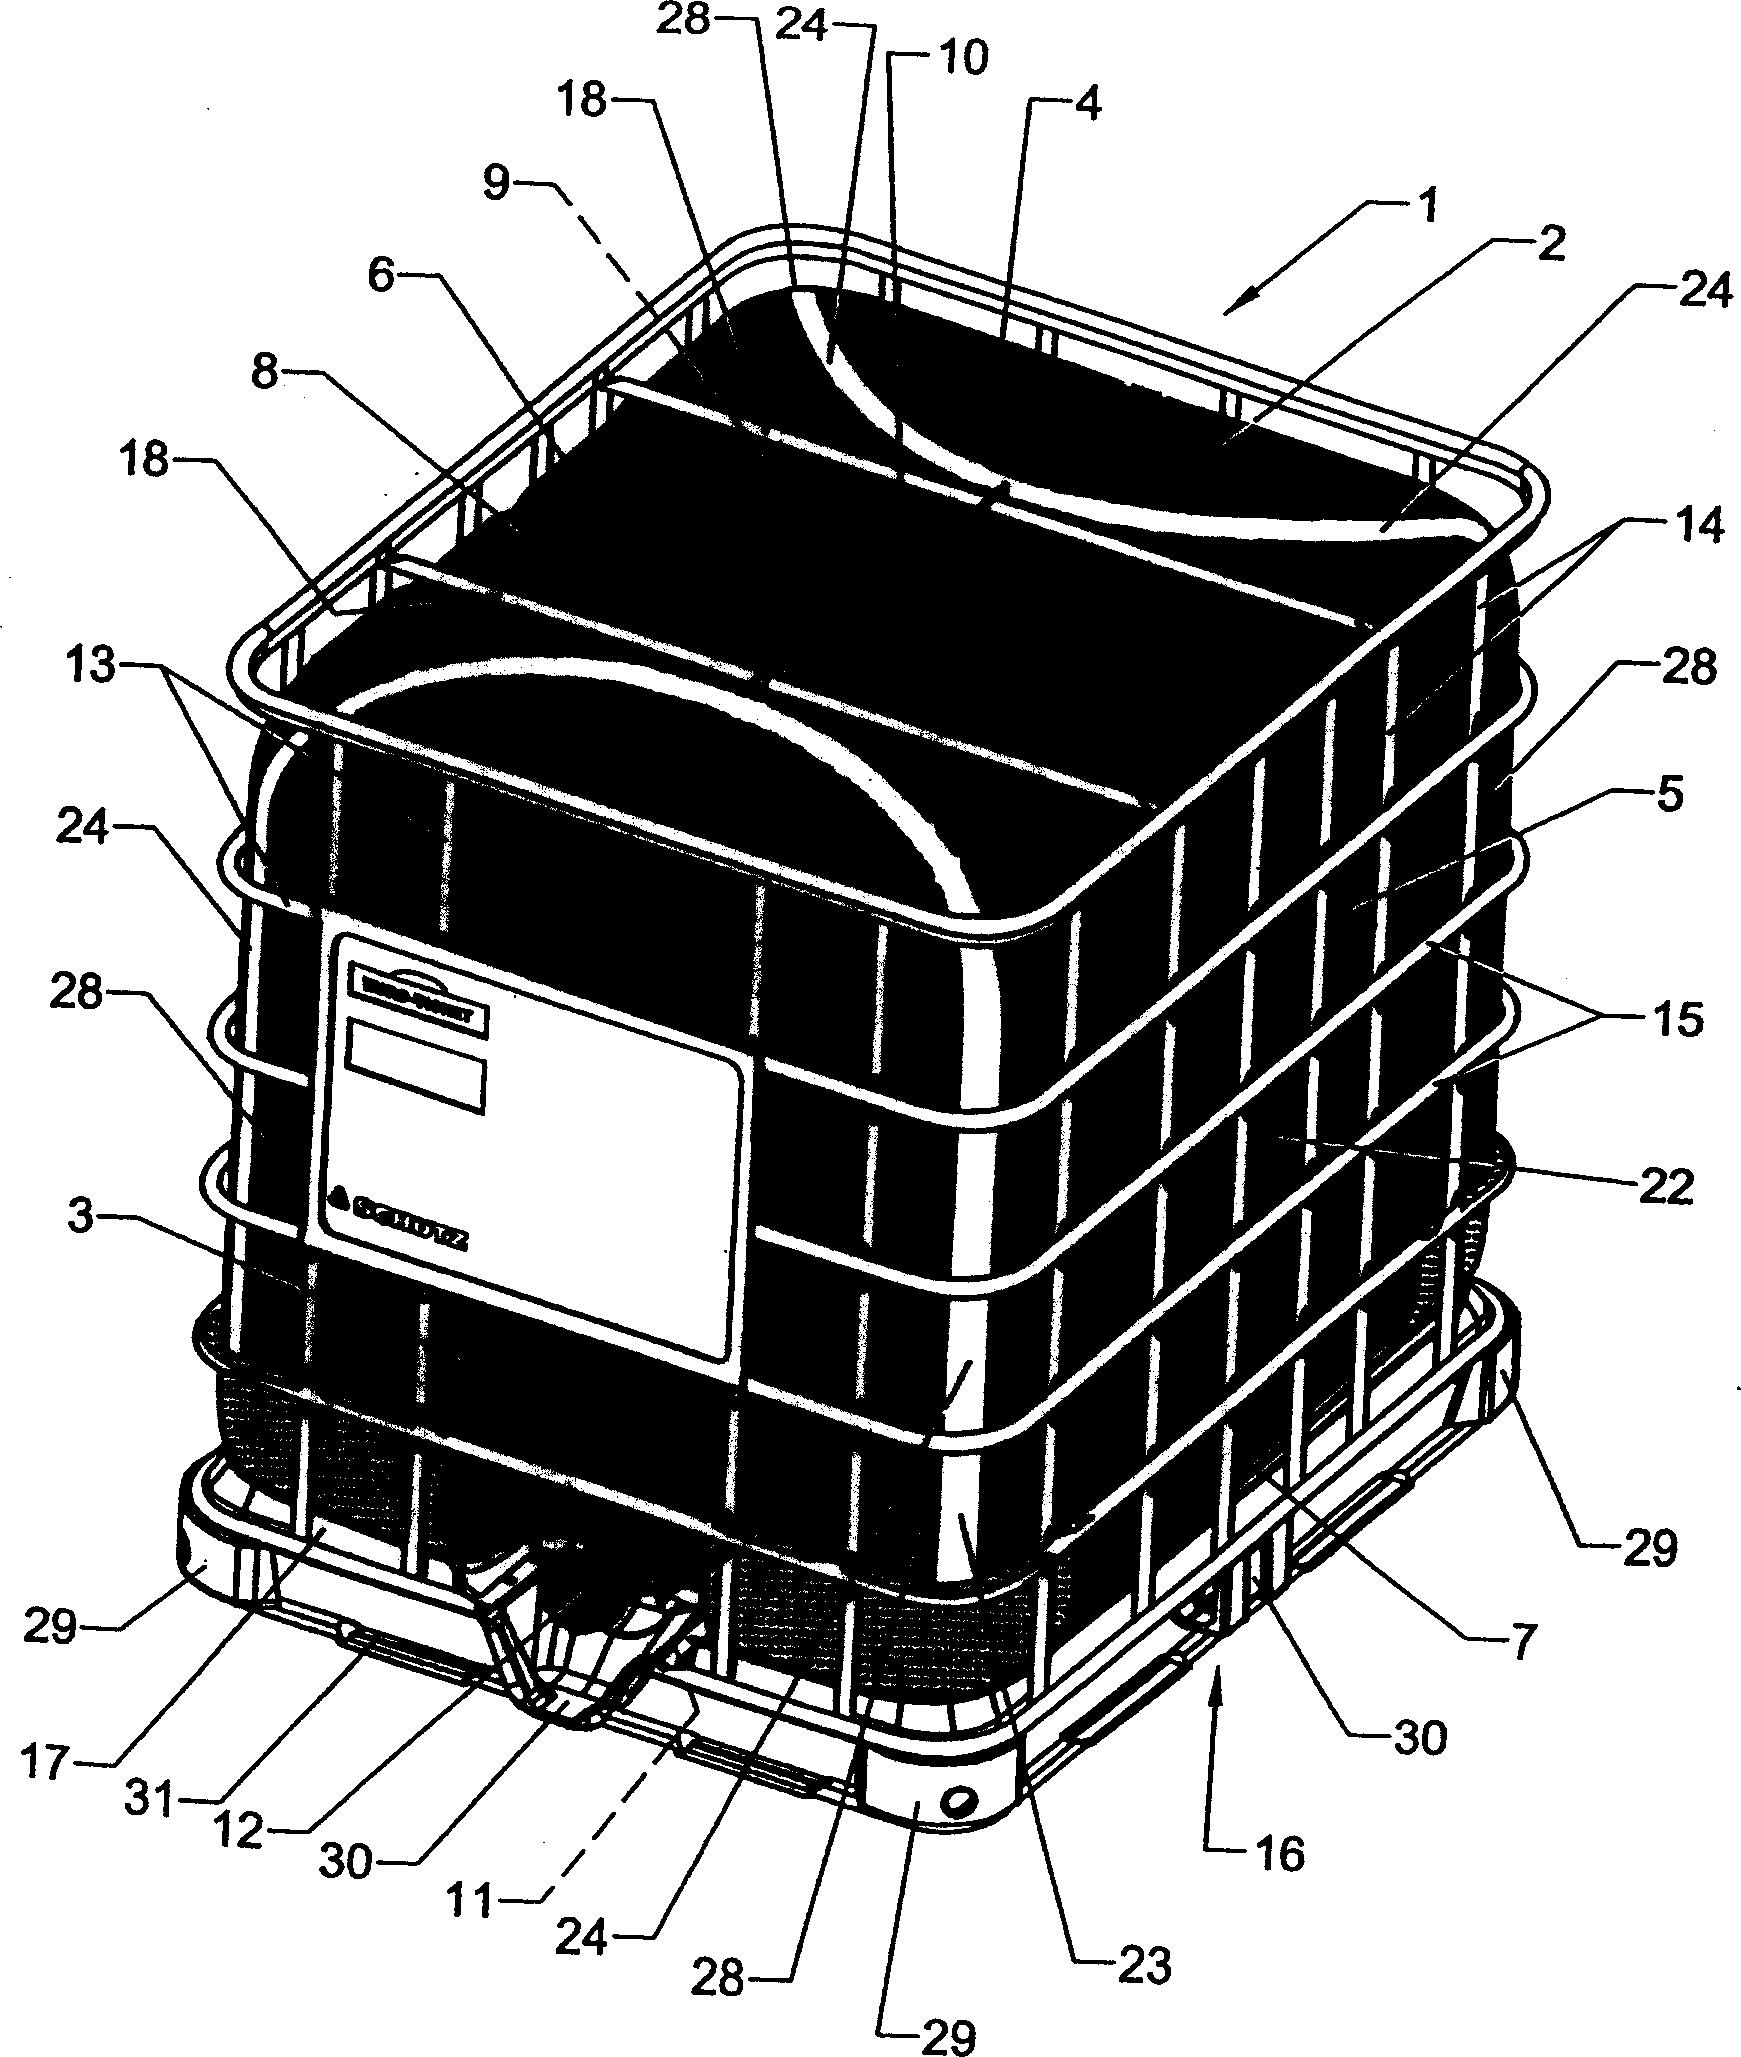 Transport and storage container for liquids and method for manufacturing an inner plastic container of the transport and storage container